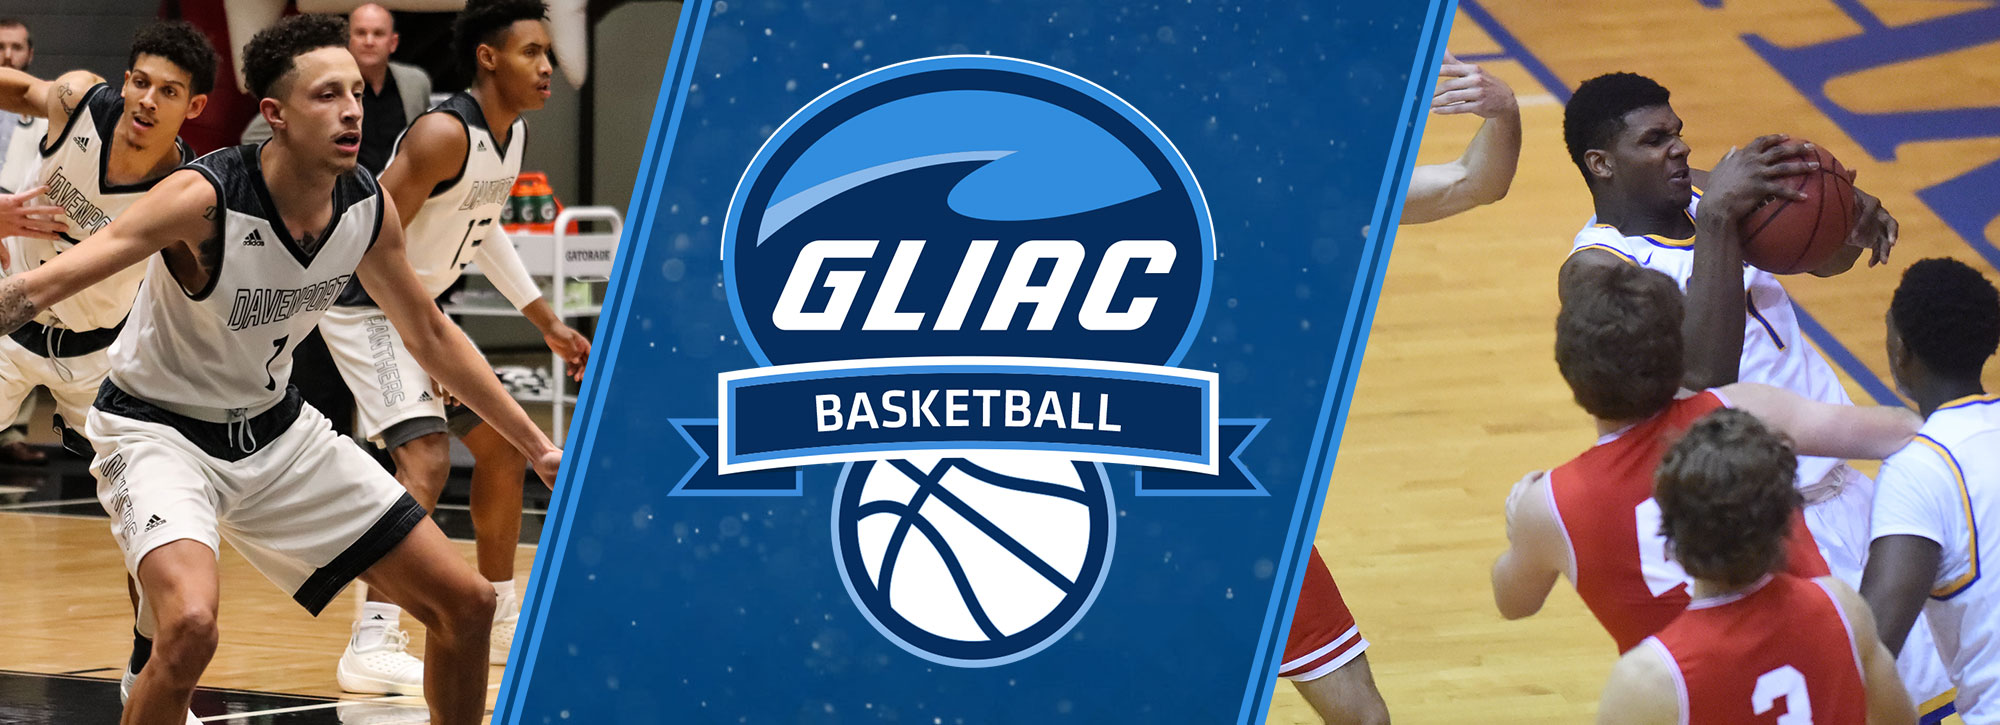 Lake Superior State's Stein, Davenport's Hudson-Emory Selected GLIAC Men's Basketball Players of the Week